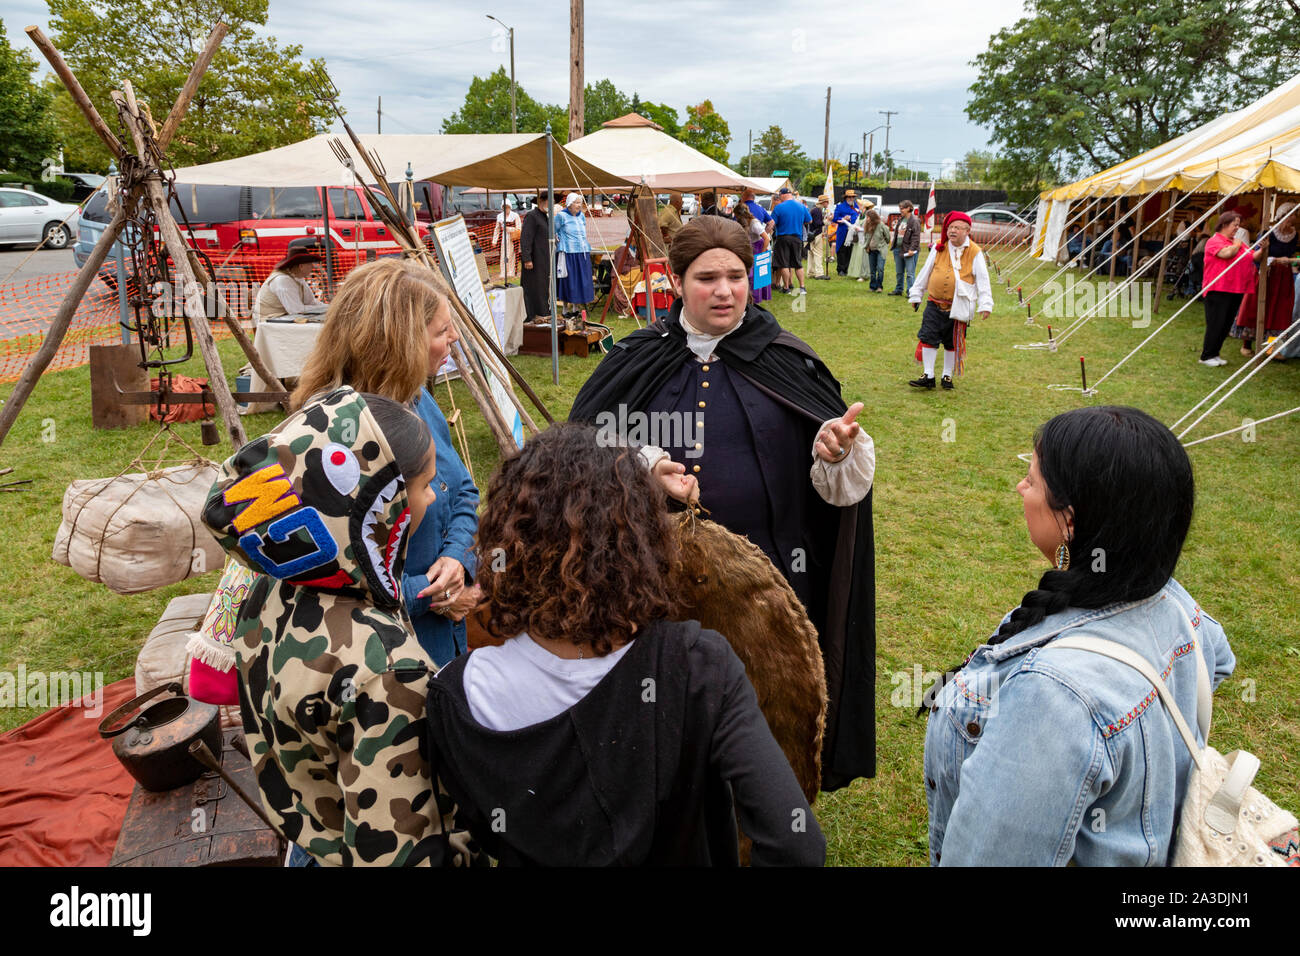 Detroit, Michigan - The Ste. Anne Parish de Detroit holds its third annual Rendez-vous cultural festival. The event celebrates the French, Metis, and Stock Photo